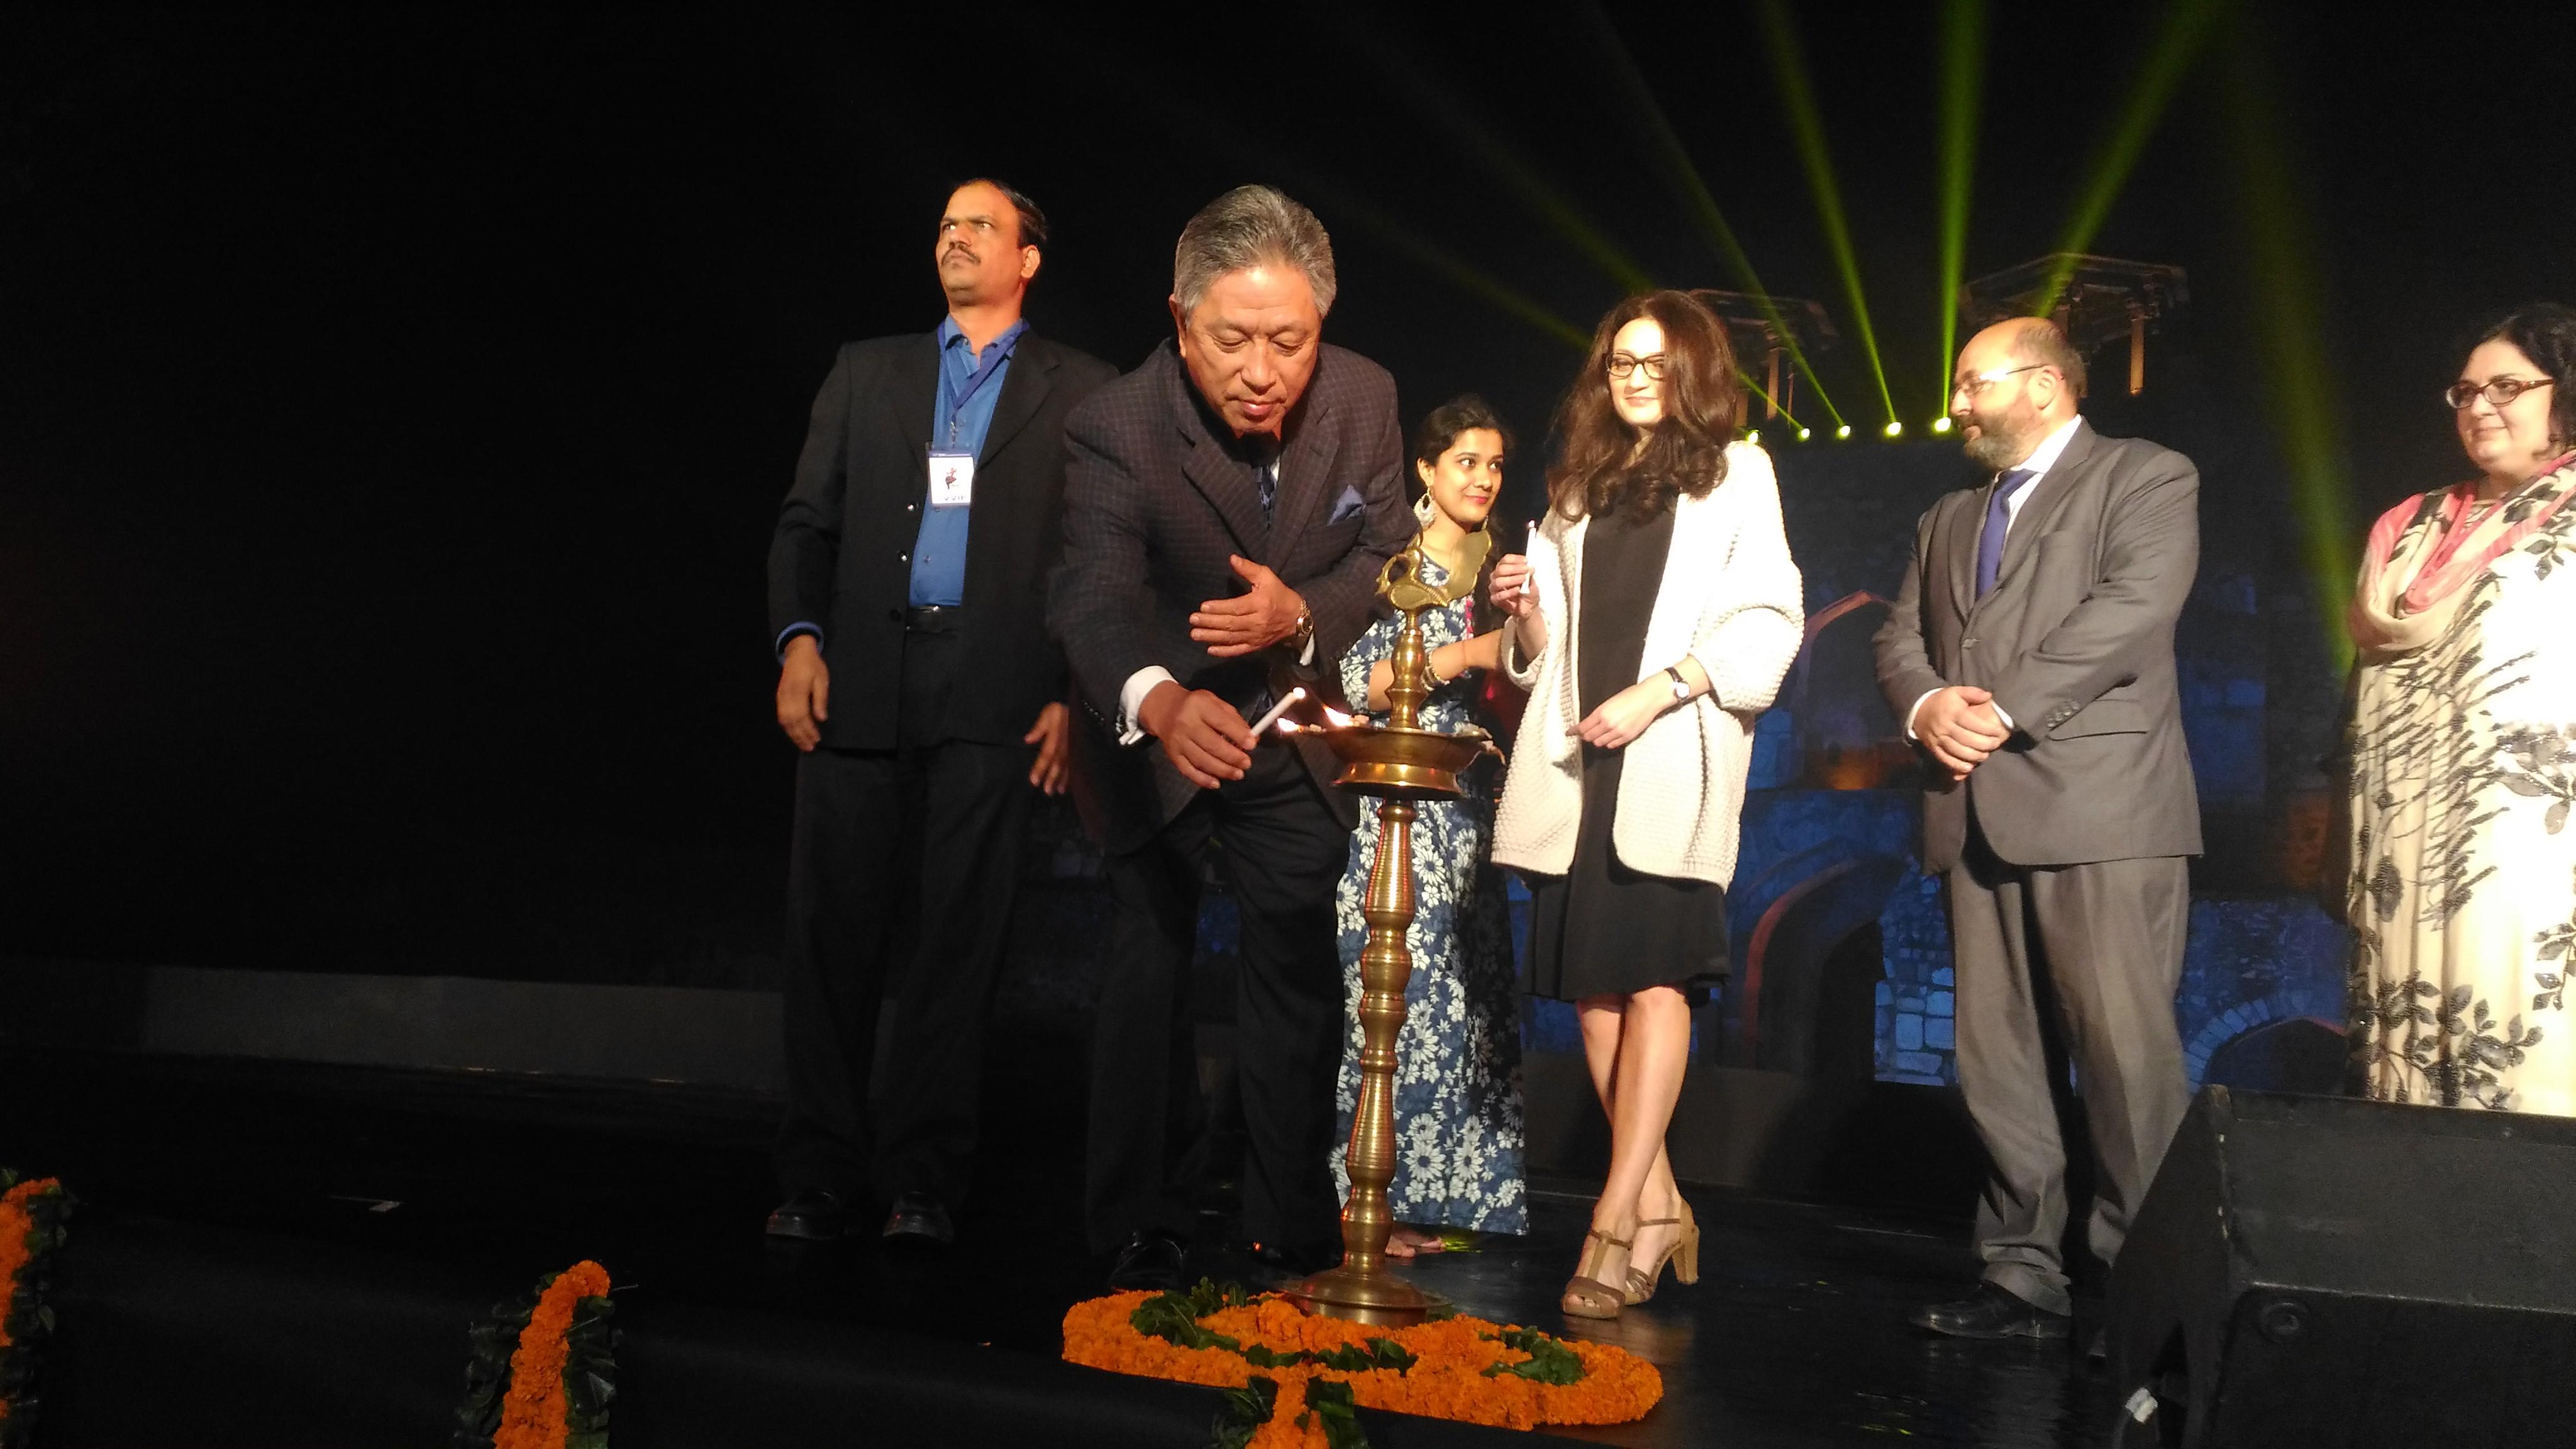 1.The 11th Delhi International Arts Festival, organized by Forum for Art beyond Borders and Prasiddha Foundation, held on 11-25 November. H.E. Amb. and Madam Tien were invited to participate in the opening ceremony at magnificent Purana Qila, and H.E. Amb. lit lamp along with Ms. Nana Mgne, Russian Counsellor, Slovakia Counsellor, Ms. Agne Sakalauskaite, Amb. of Lithuania and Mr. Atul Malhari, Director of ICCR. Amb. Tien delivered a speech and presented a certificate of gratitude to Egypt Dancing Troupe on behalf of DIAF. TAI Body Theater and Little Giant Chinese Chamber Orchestra were invited to perform from 11-13 and 18-20 respectively at Delhi auditoriums and schools. Their performance had acquired echo from lots of Indian audiences.
2.Atul Malhari (left)、H.E. Amb. Tien (left 2)、Agne Sakalauskaite(right 3)、Slovakia Counsellor (right 2)、 Nana Mgeladge(right 1).